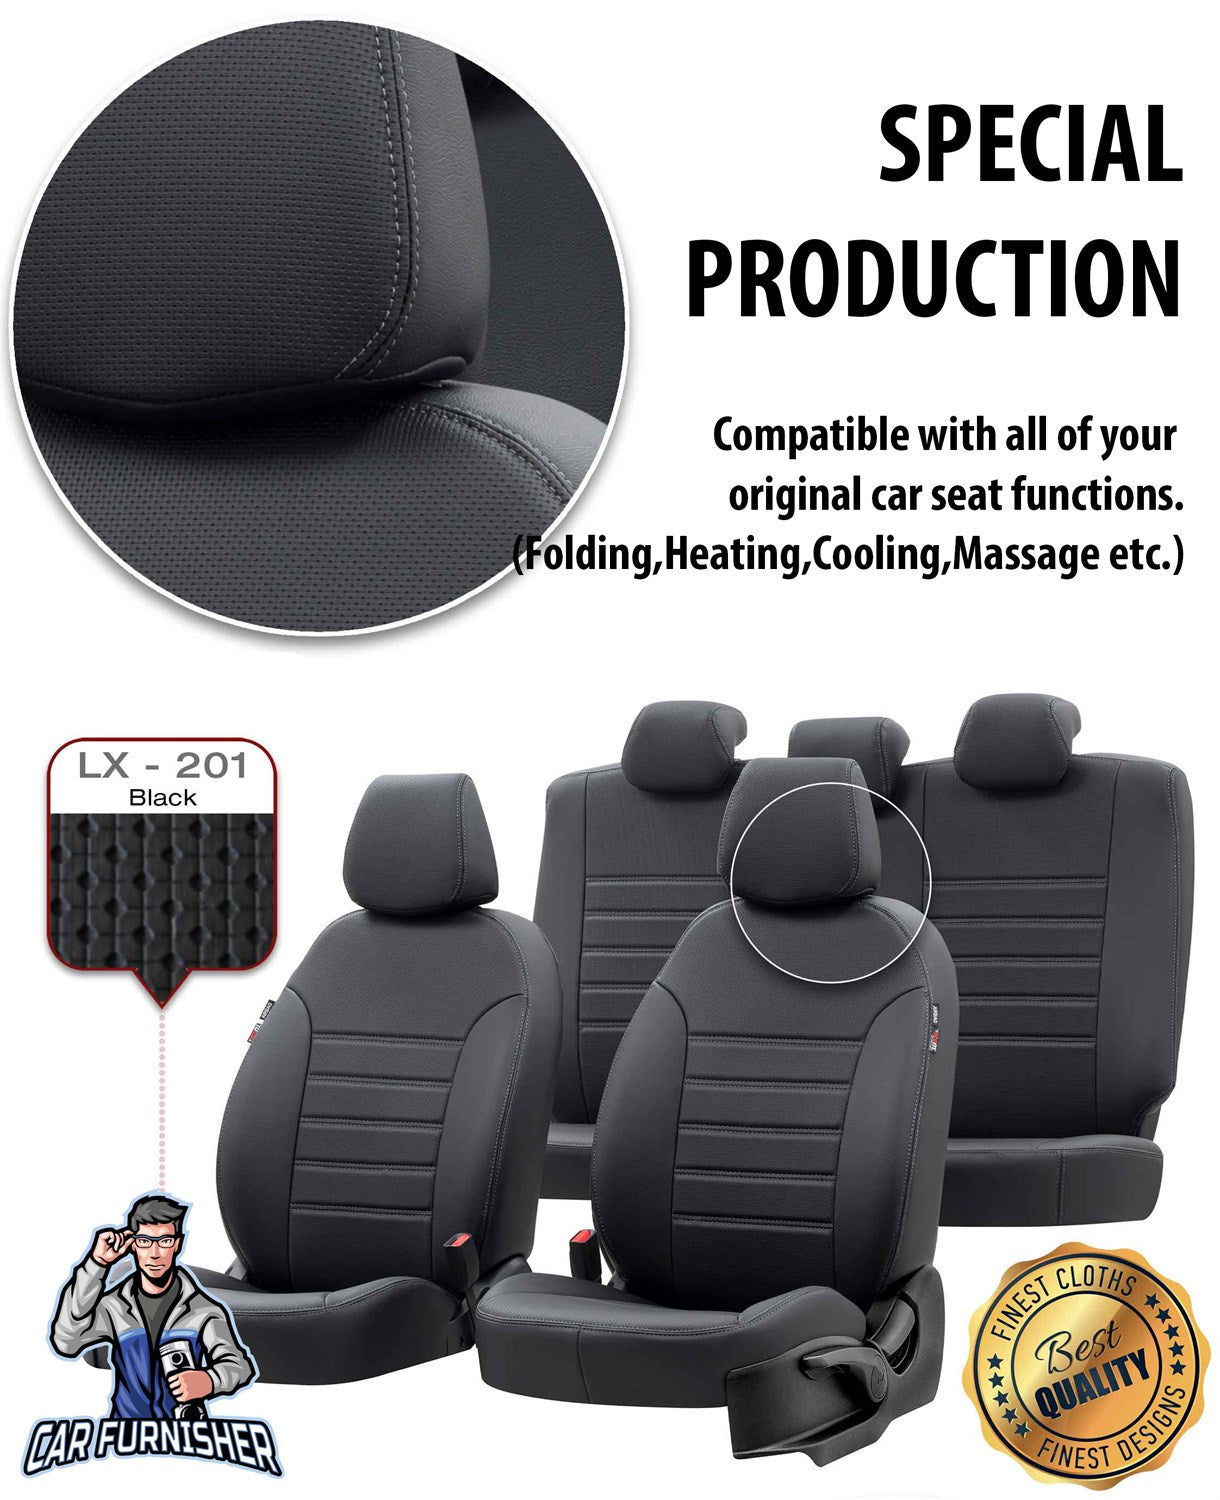 Volkswagen Transporter Seat Cover New York Leather Design Smoked Leather